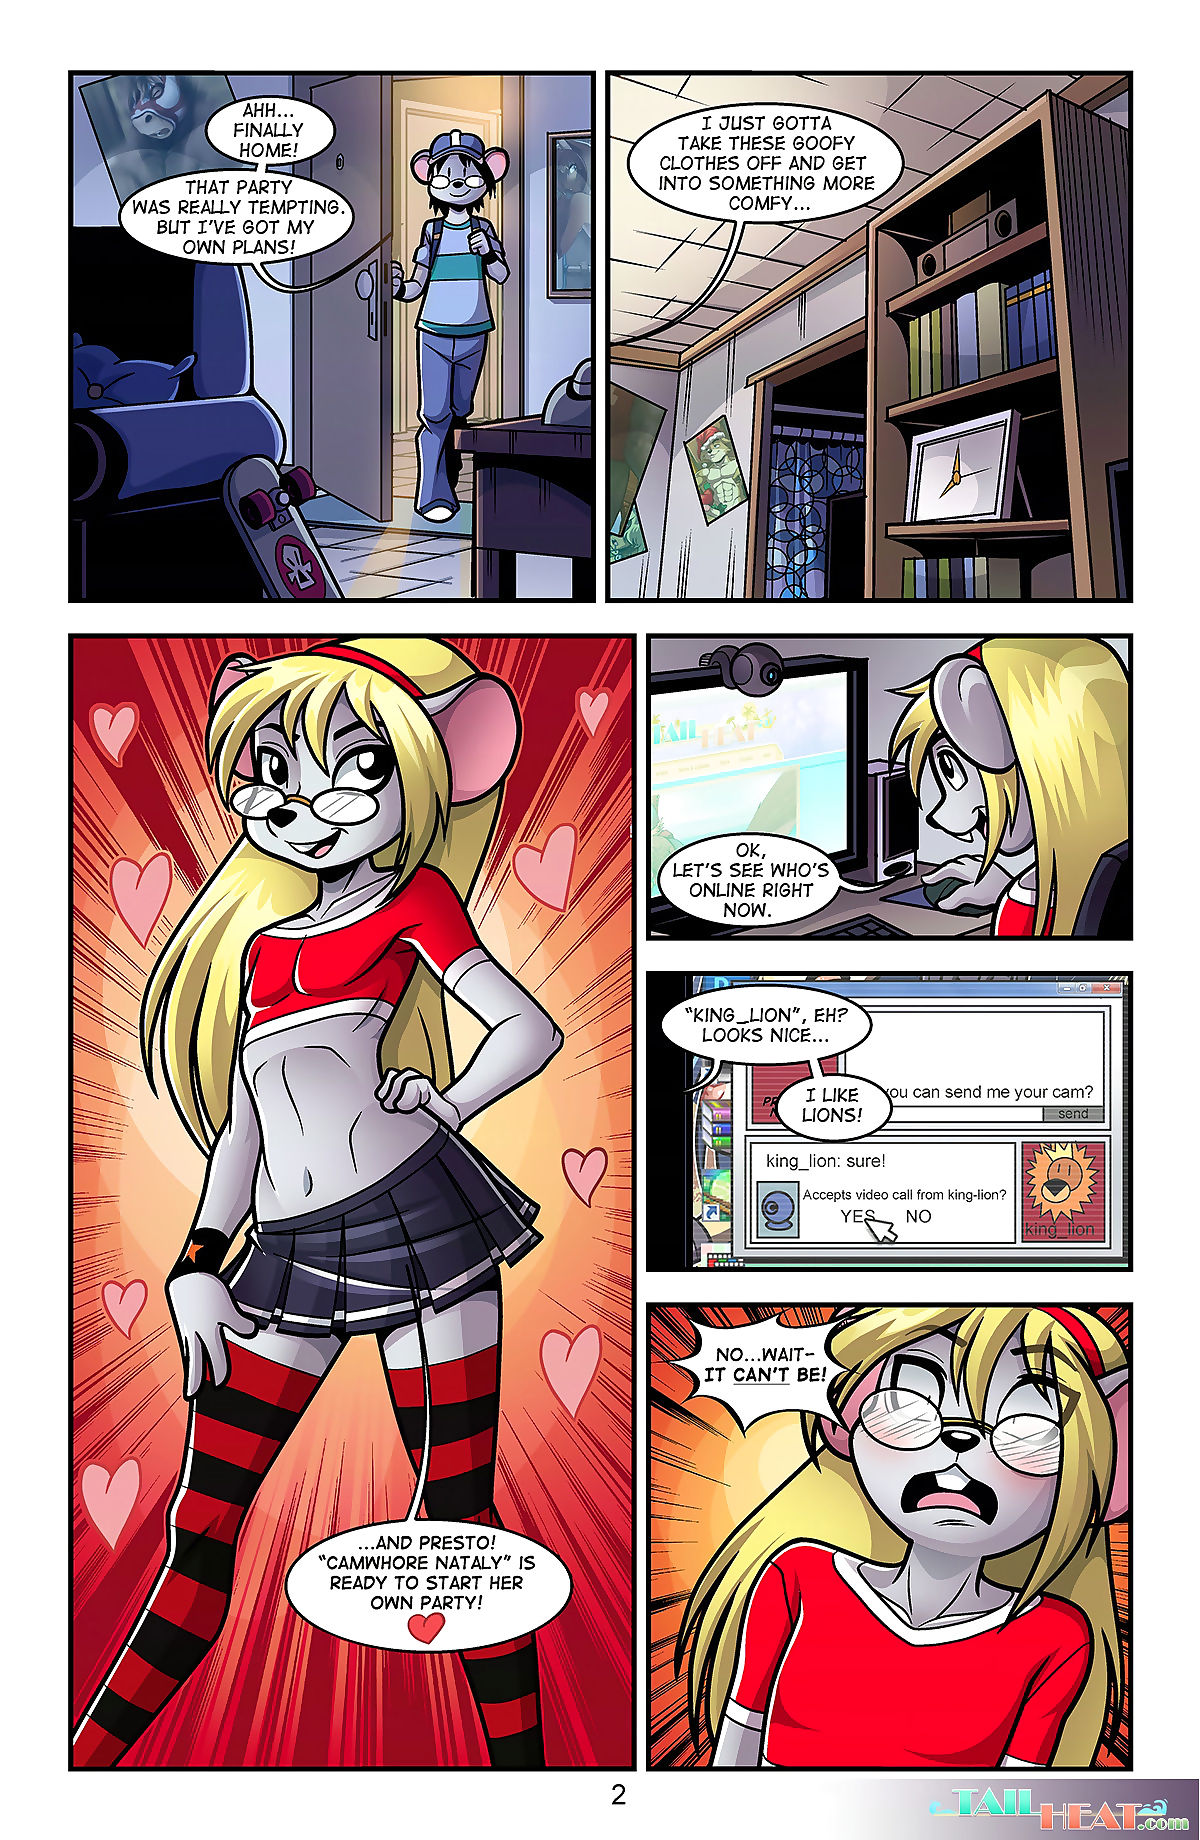 linno camwhore,tail 热 page 1